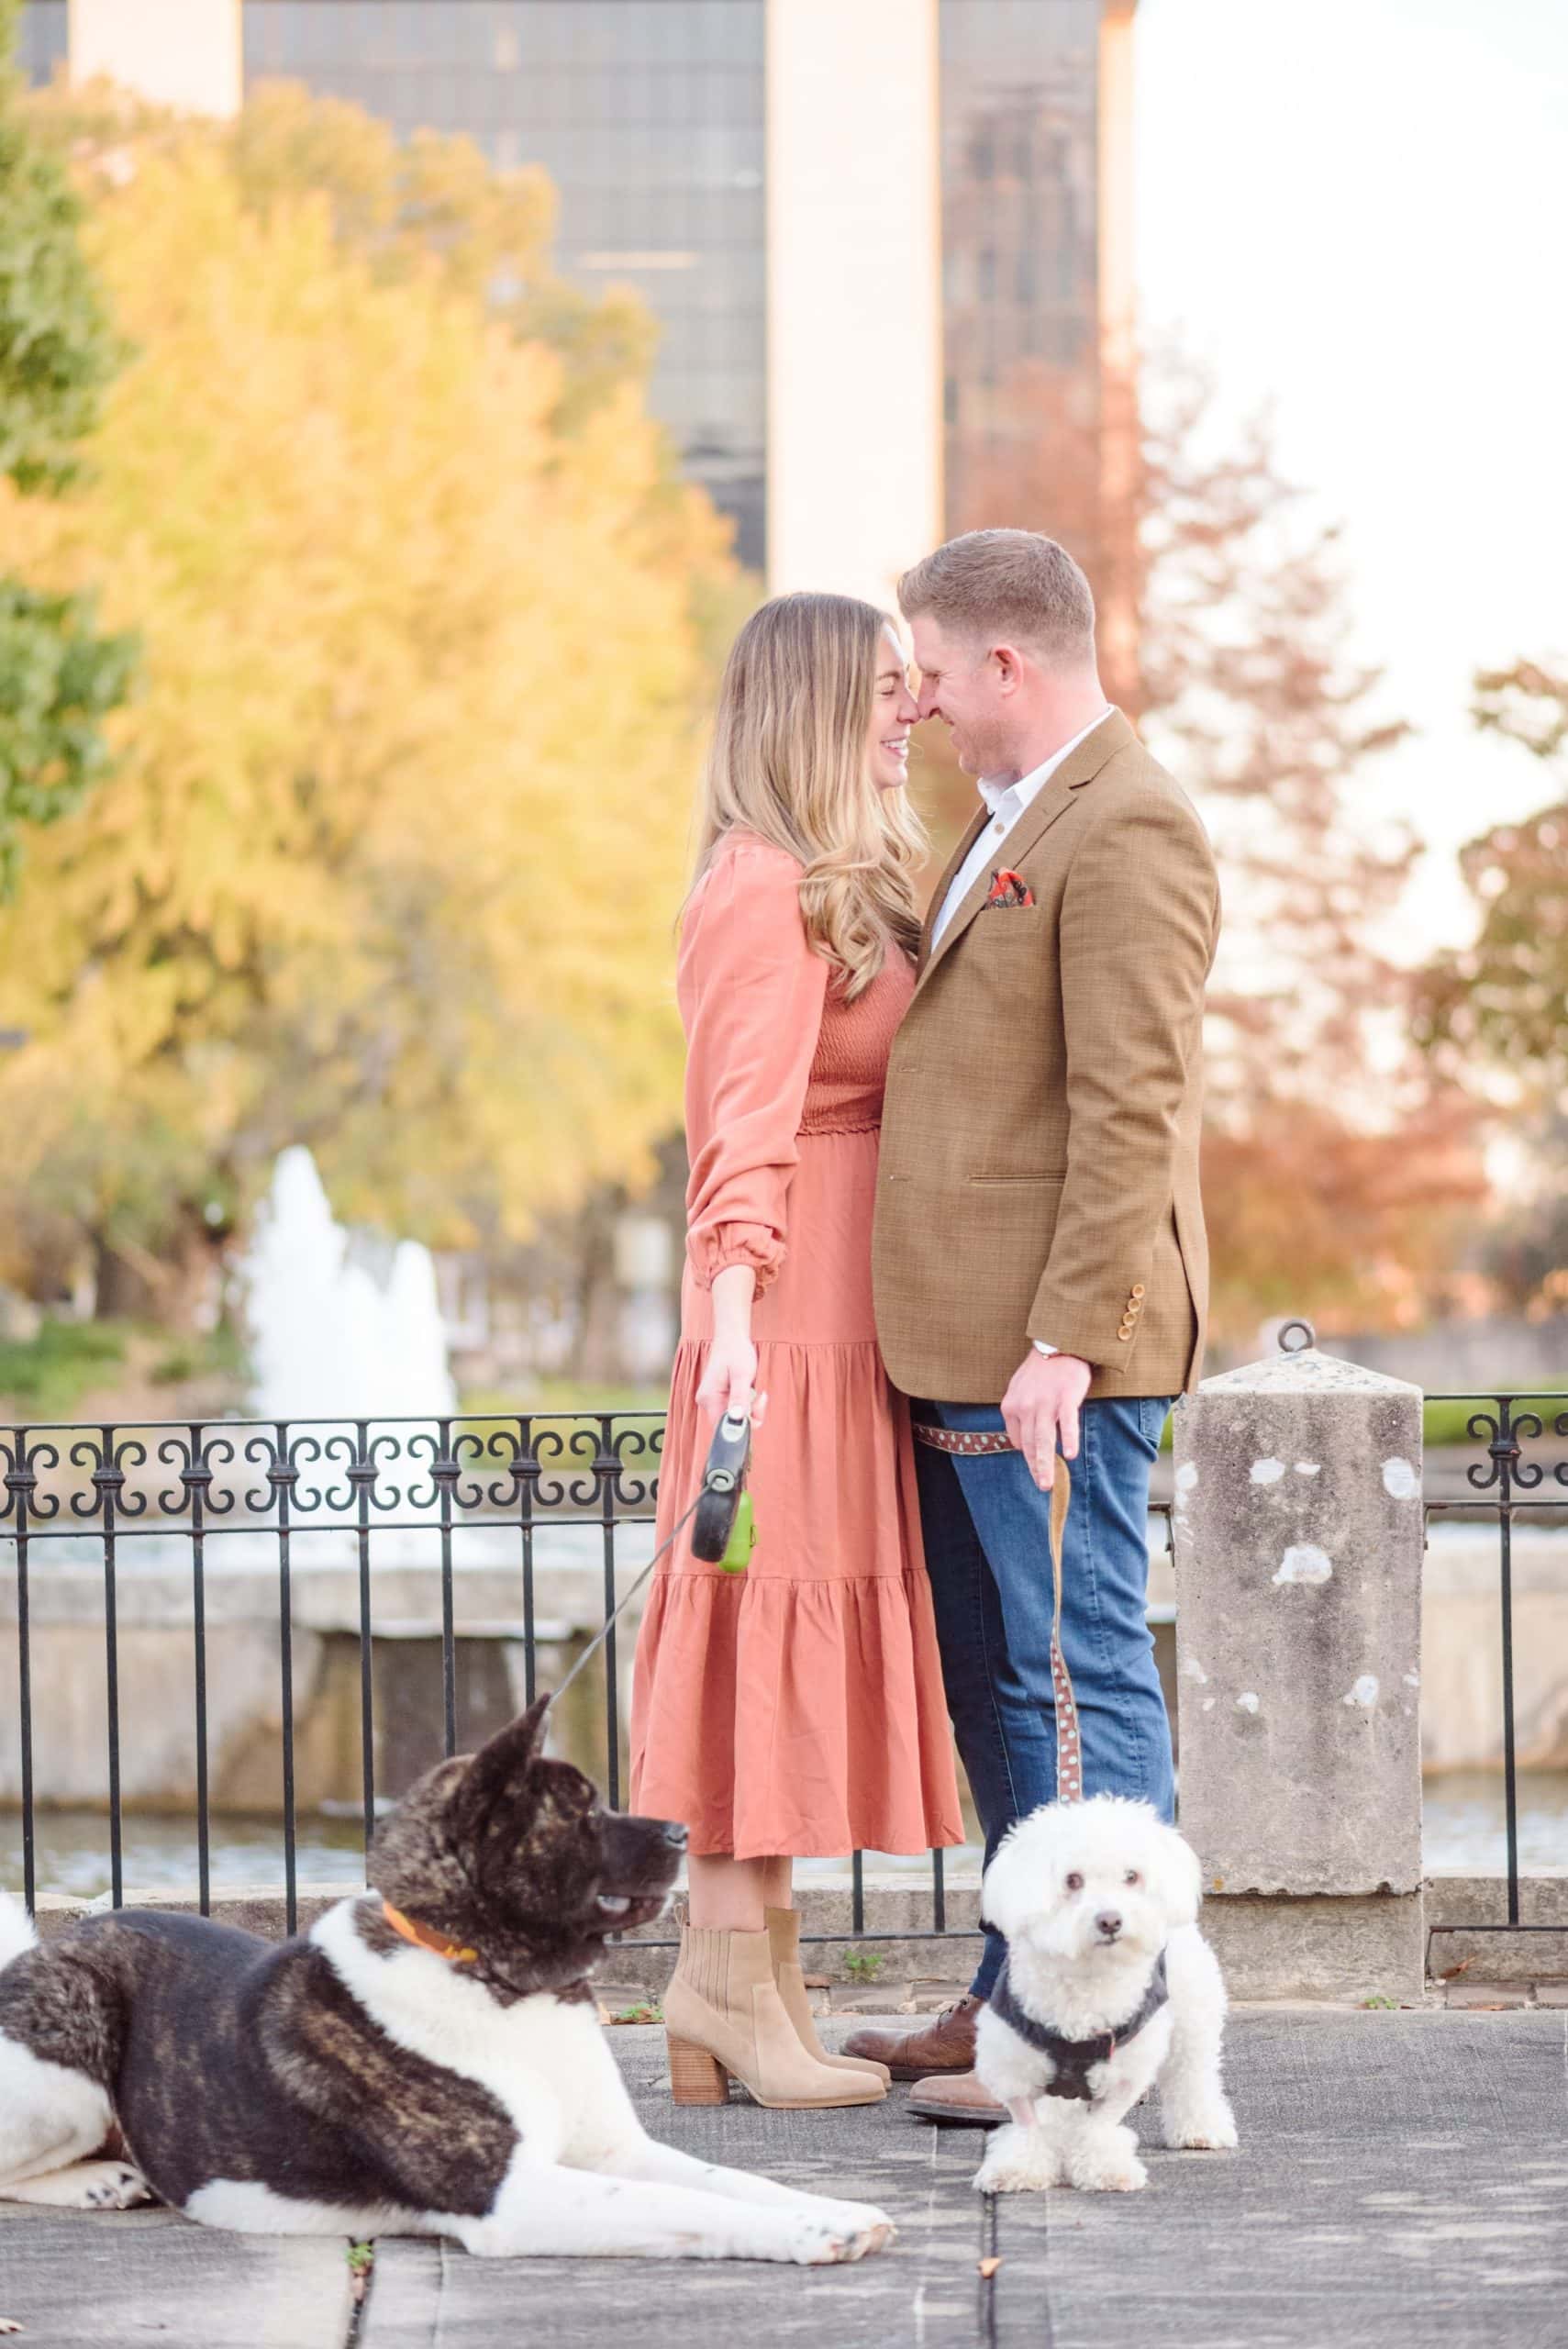 City engagement photos with a couple and their two dogs.